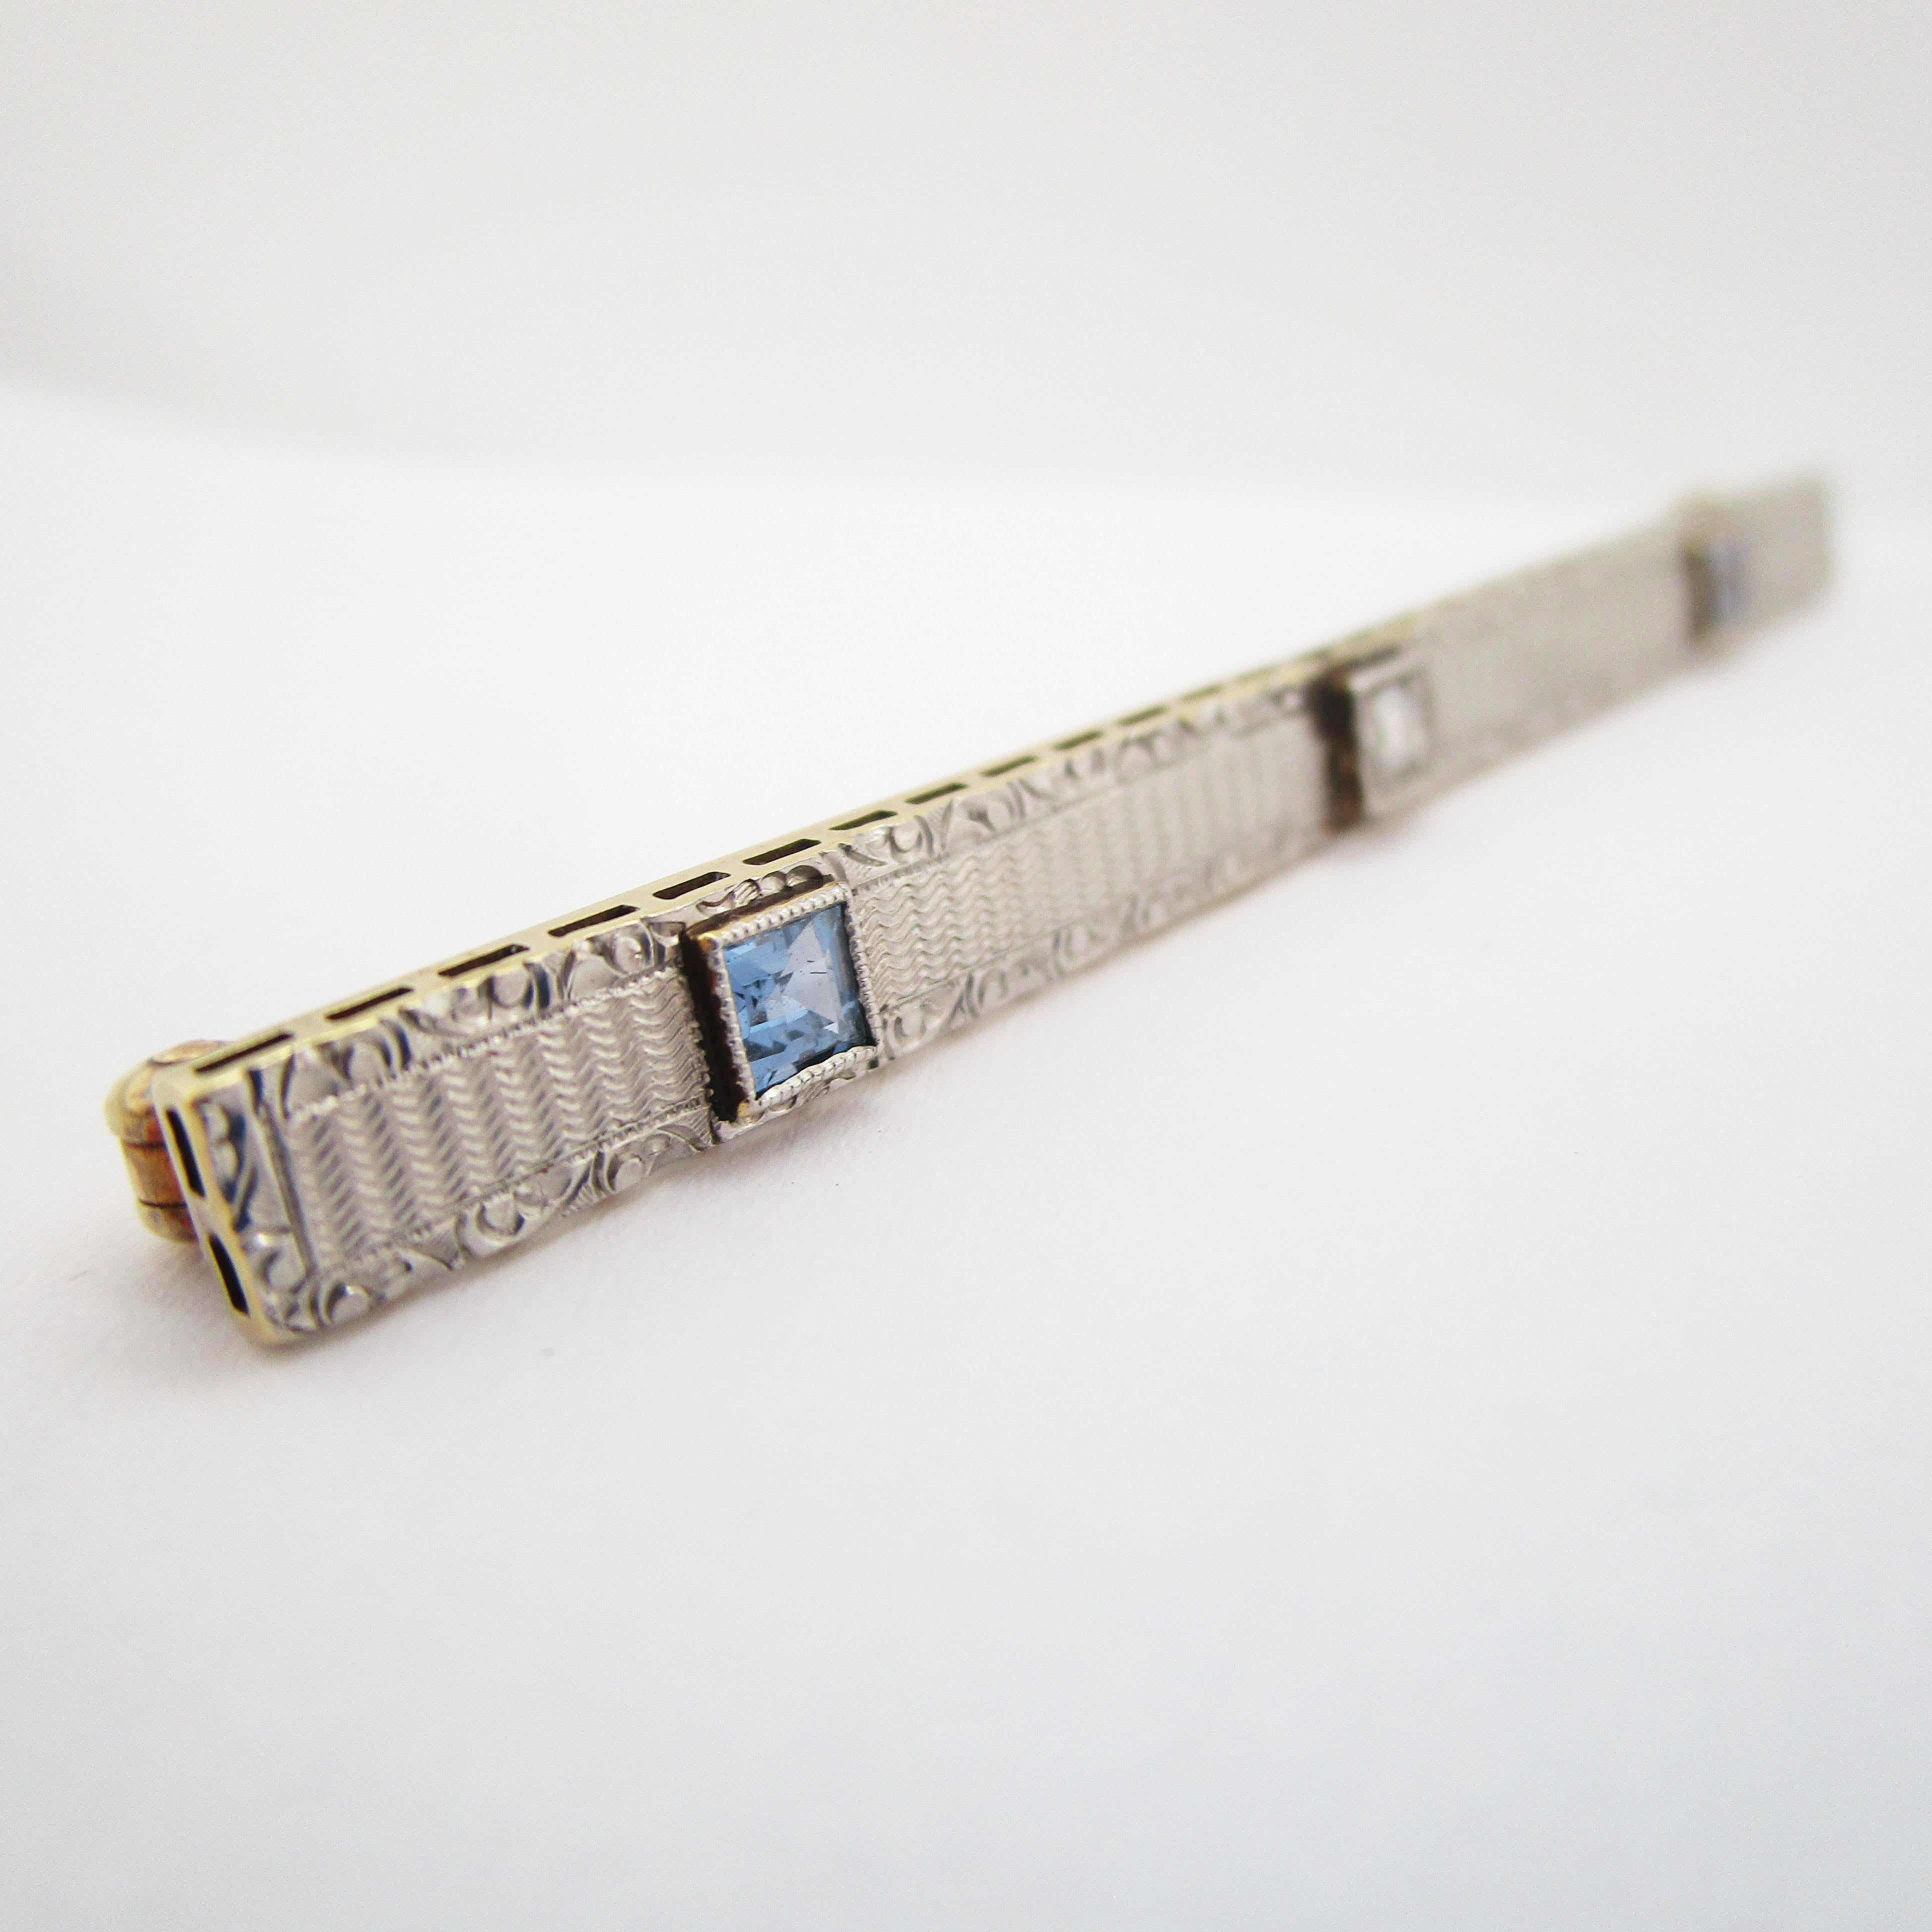 This stunning Edwardian bar pin features a brilliant combination of platinum over gold set with a bright white diamond and two gorgeous natural blue sapphires! The edges of the pin are hand engraved with a lovely scroll-like pattern that creates a